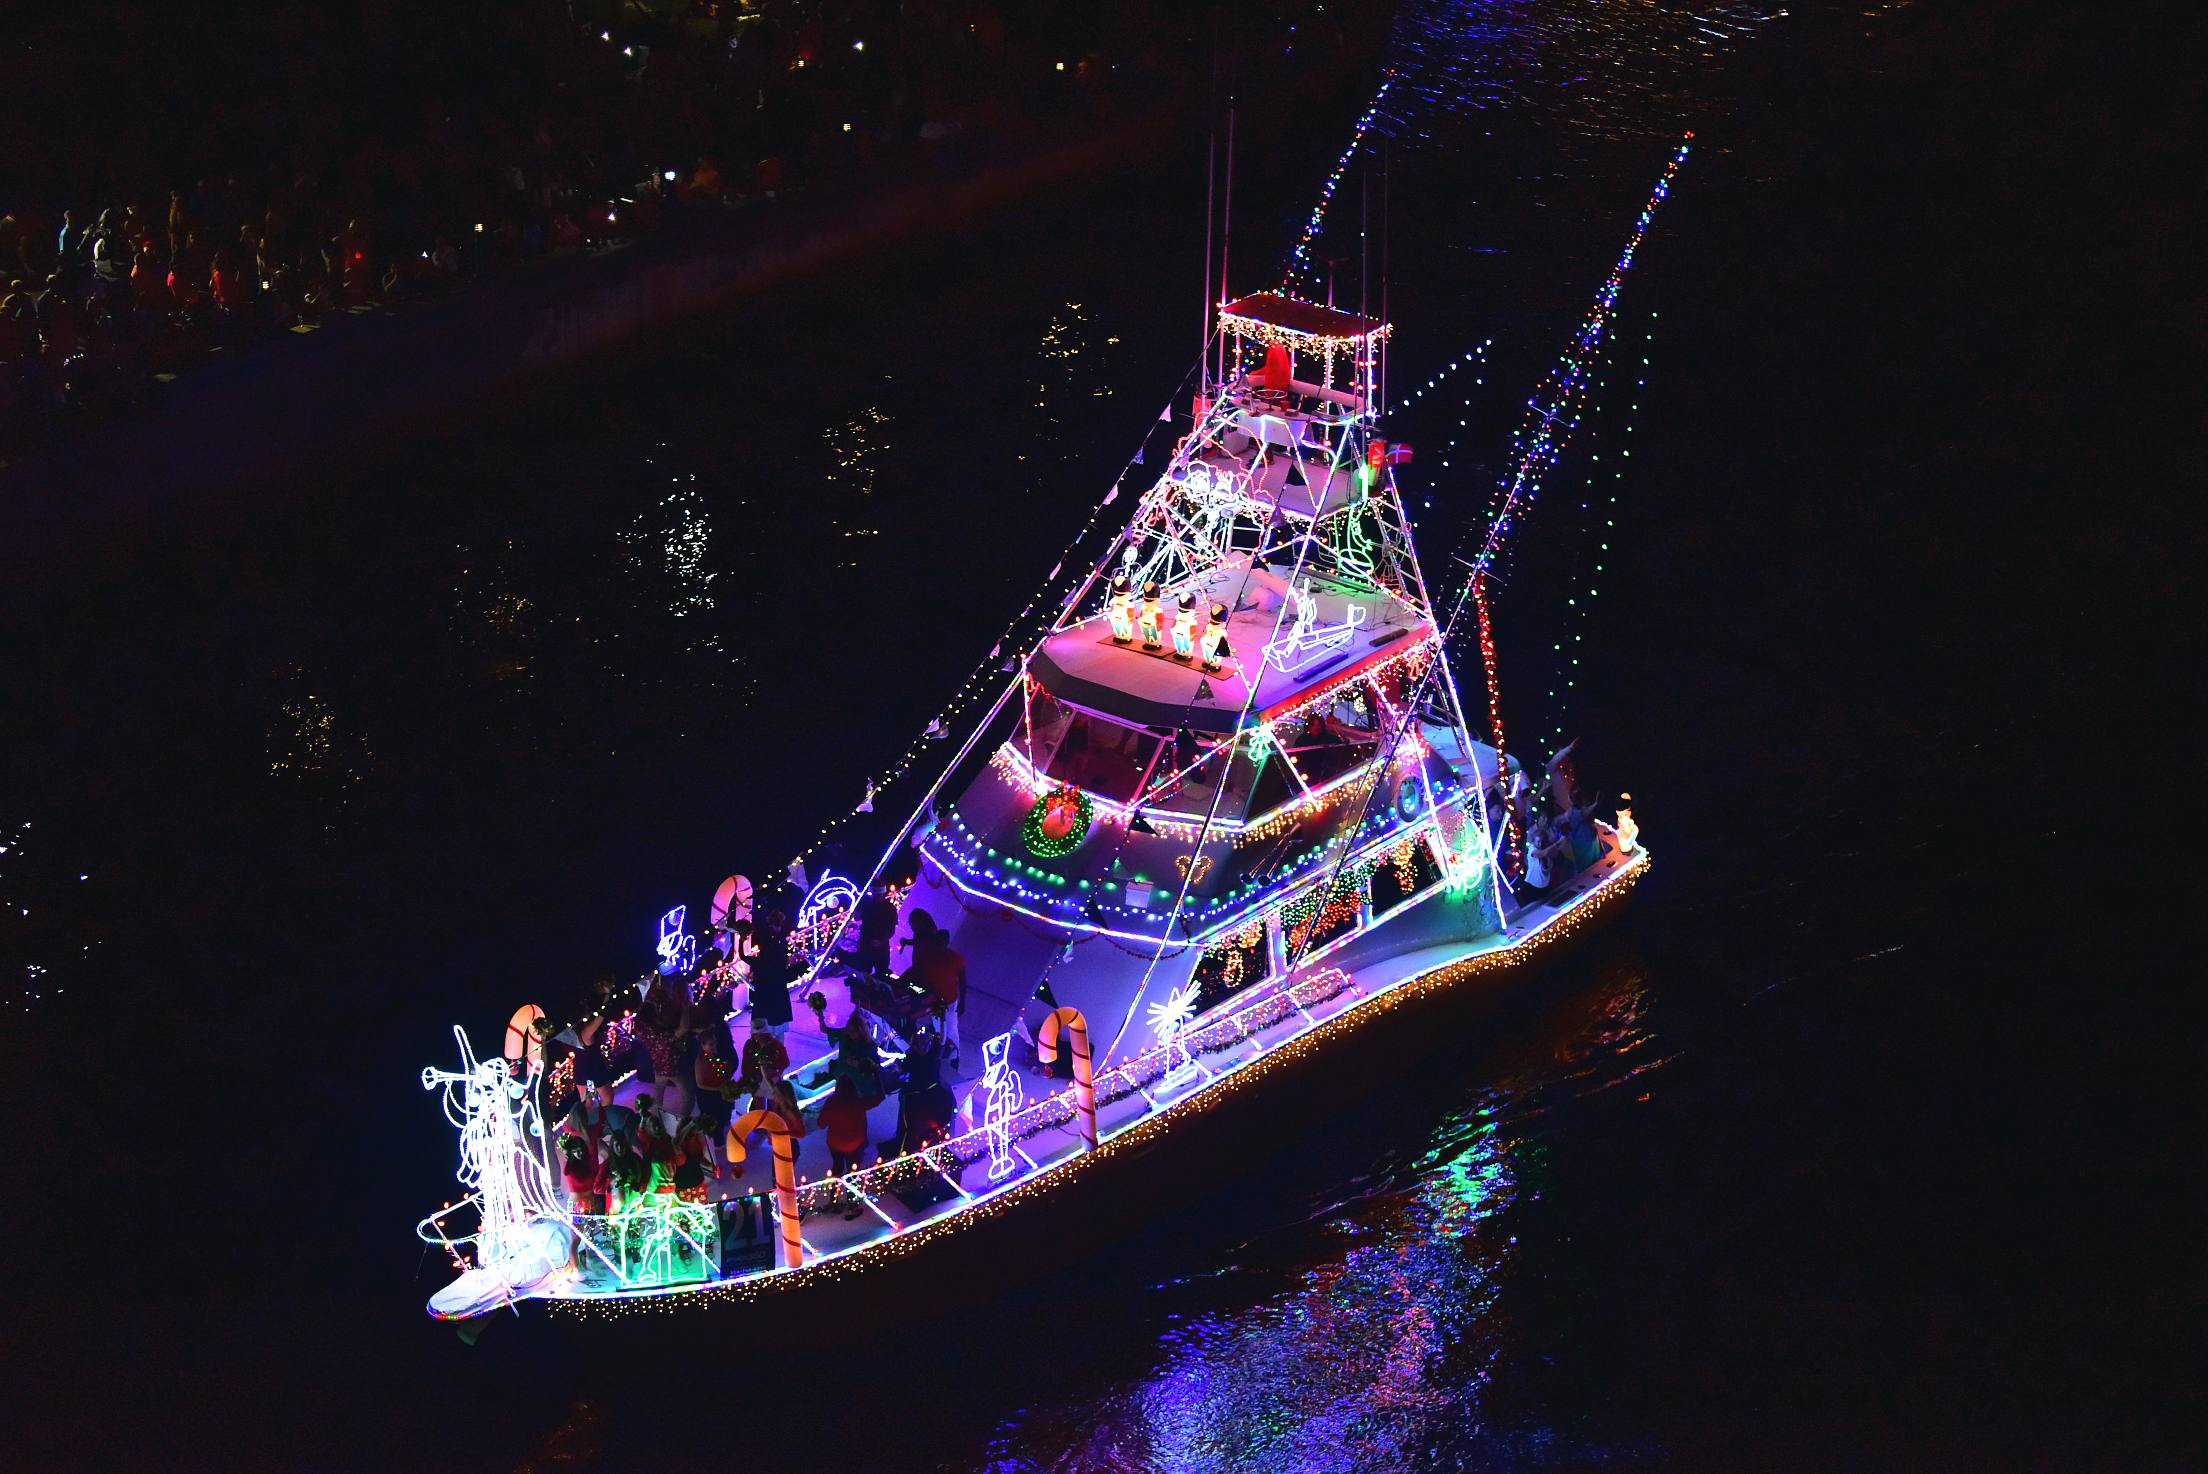 Mr Bobb, boat number 21 in the 2021 Winterfest Boat Parade